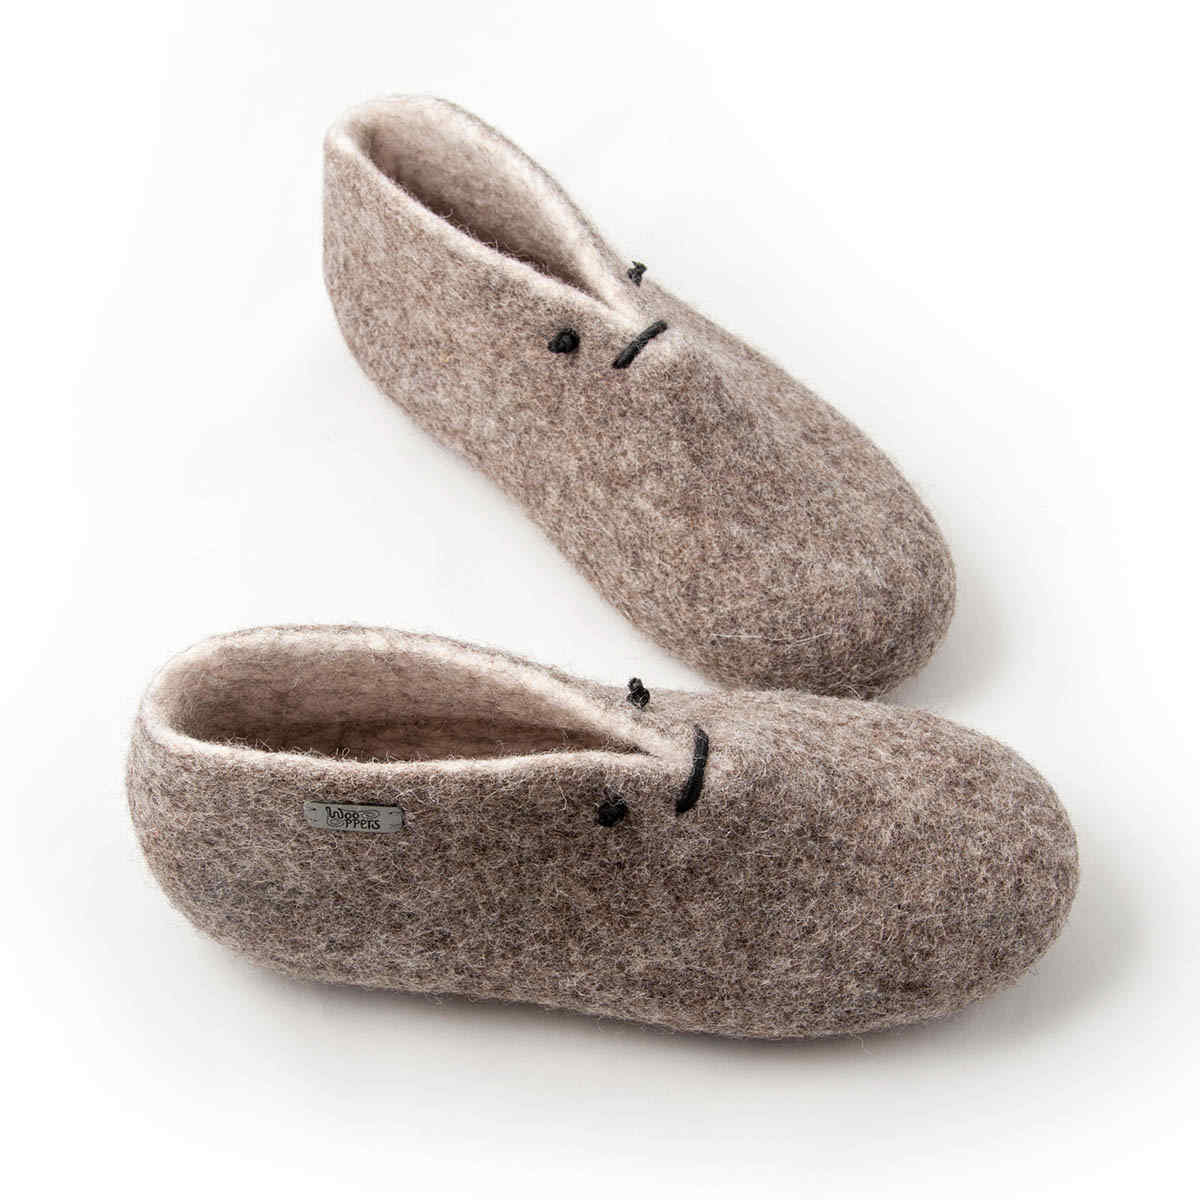 Slipper booties in grey and white